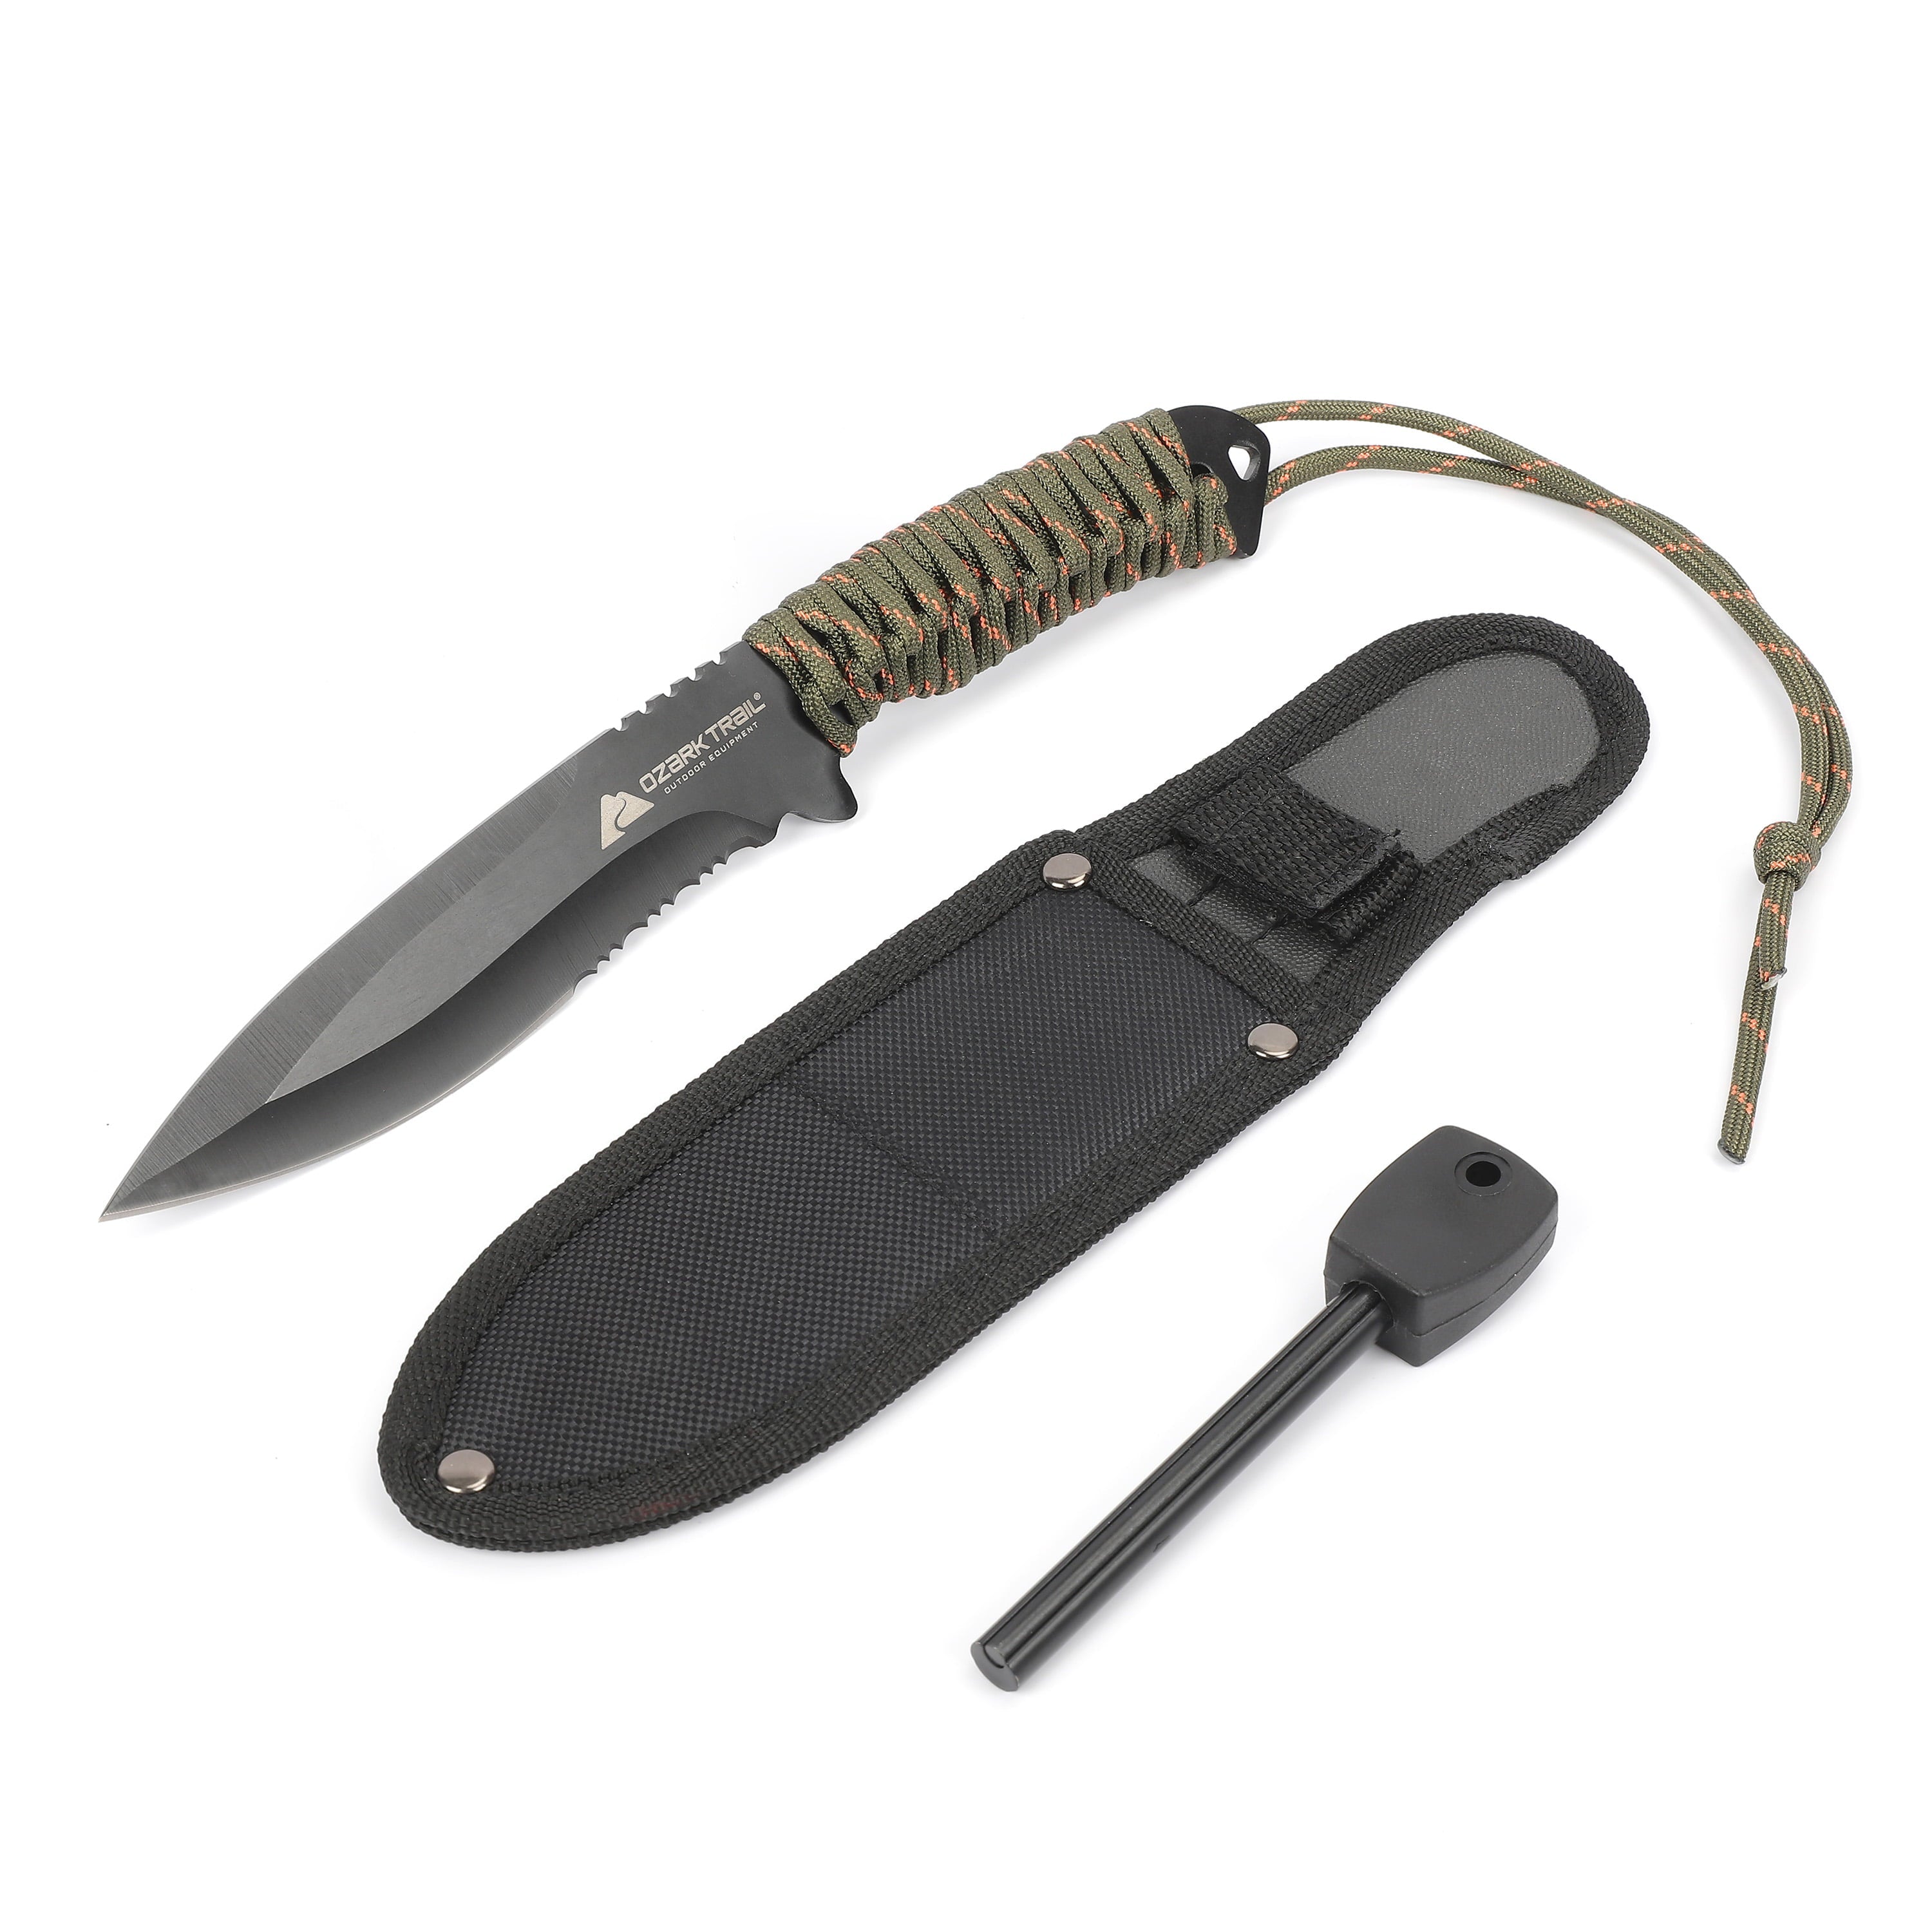 Ozark Trail Stainless Steel Paracord Knife with Fire Starter, Model 50 –  HardGrizzly